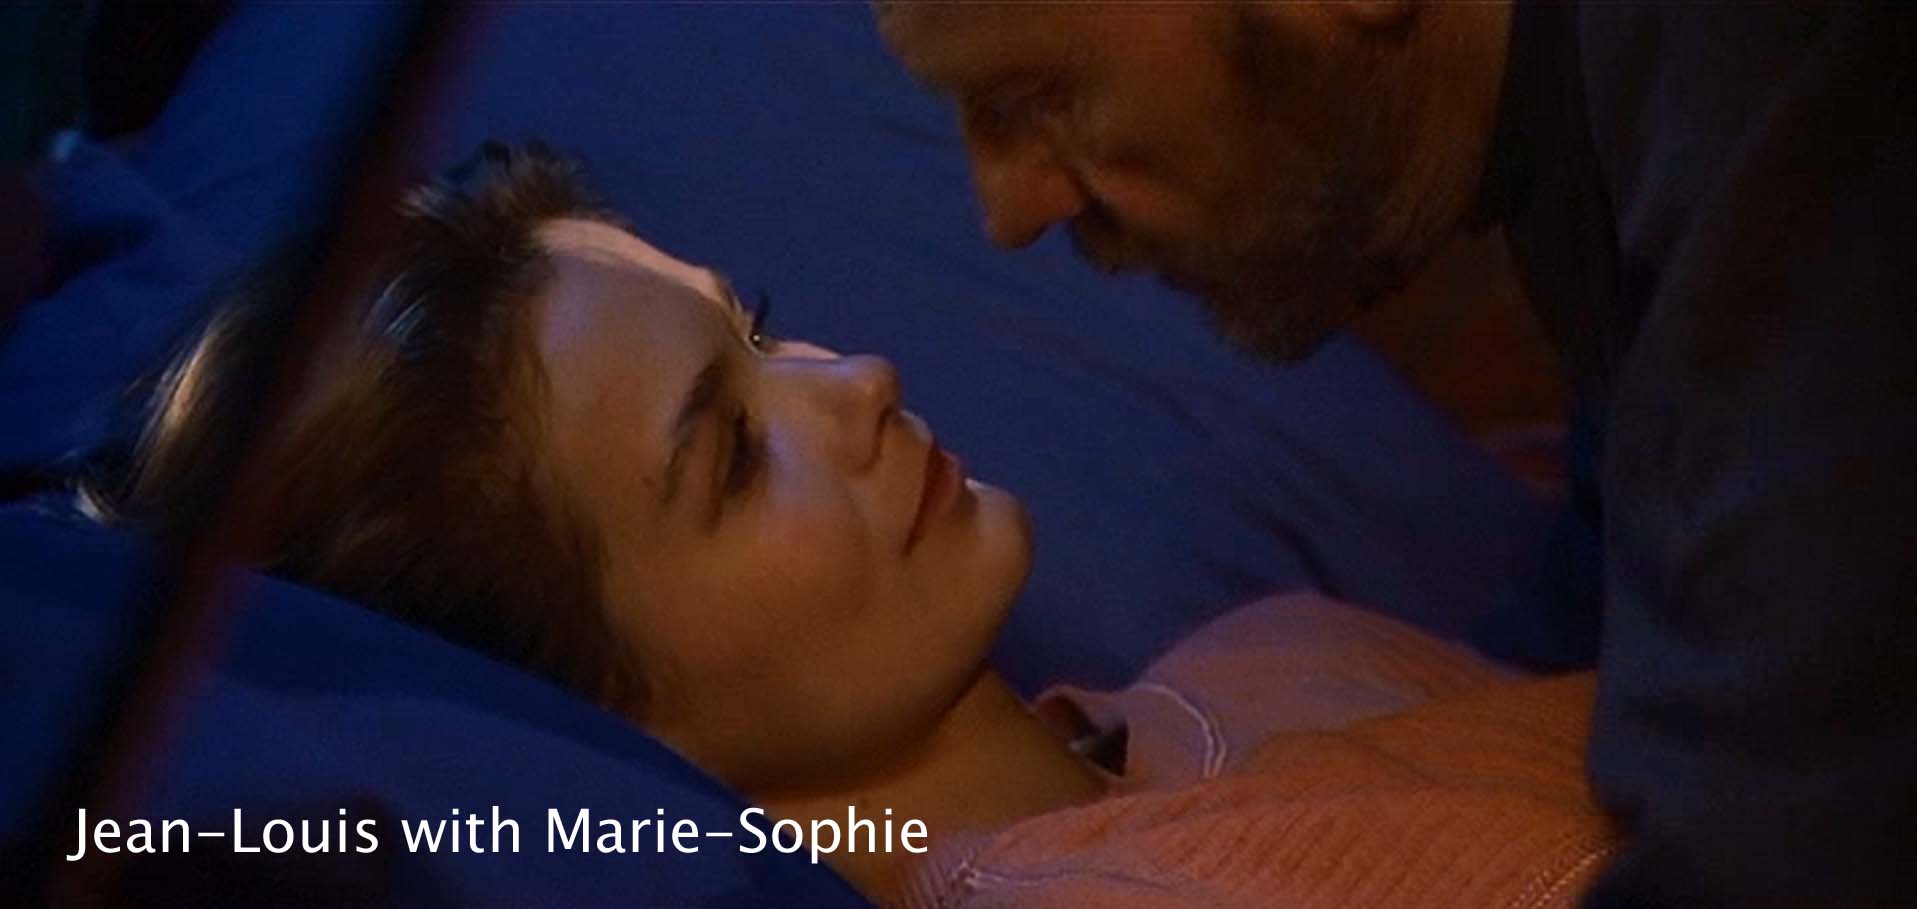 Jean-Louis with Marie-Sophie